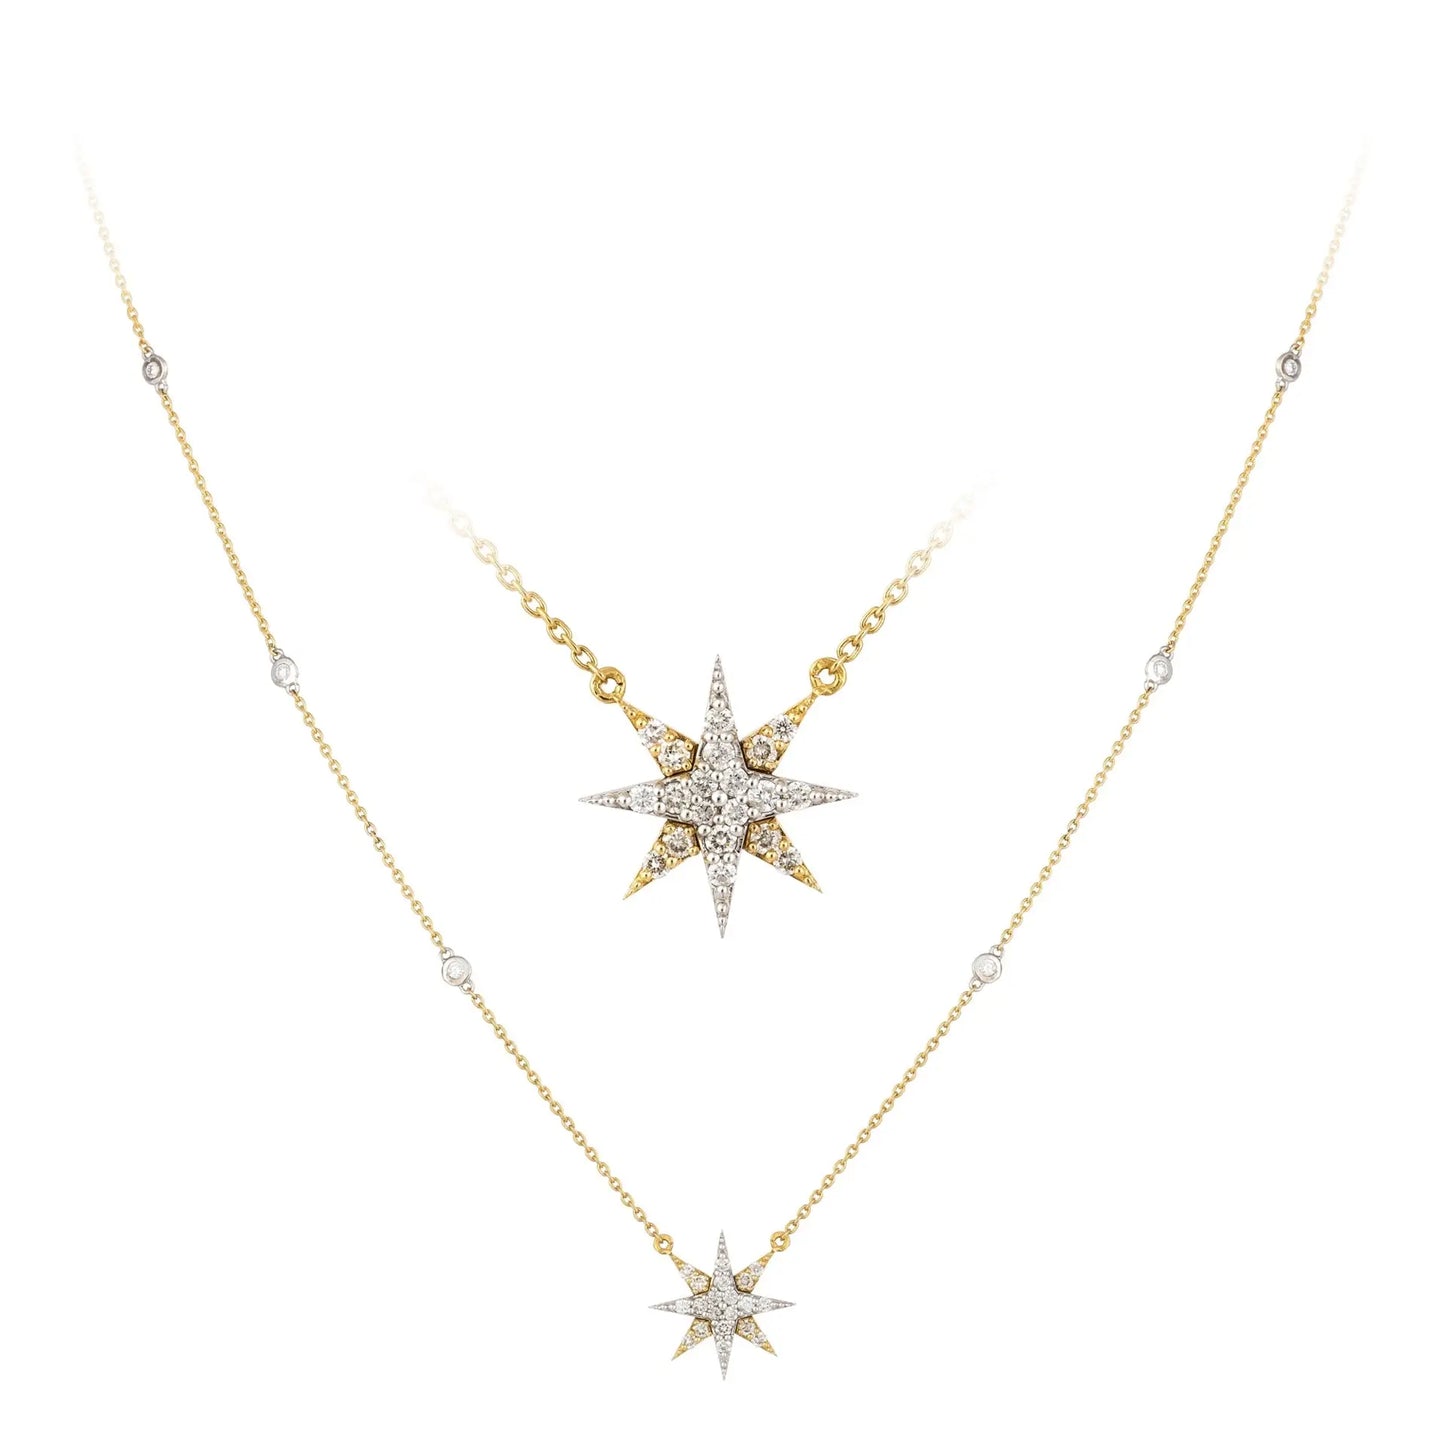 White and Yellow Gold Star Diamond Necklace - Danson Jewelers White Gold Necklaces 